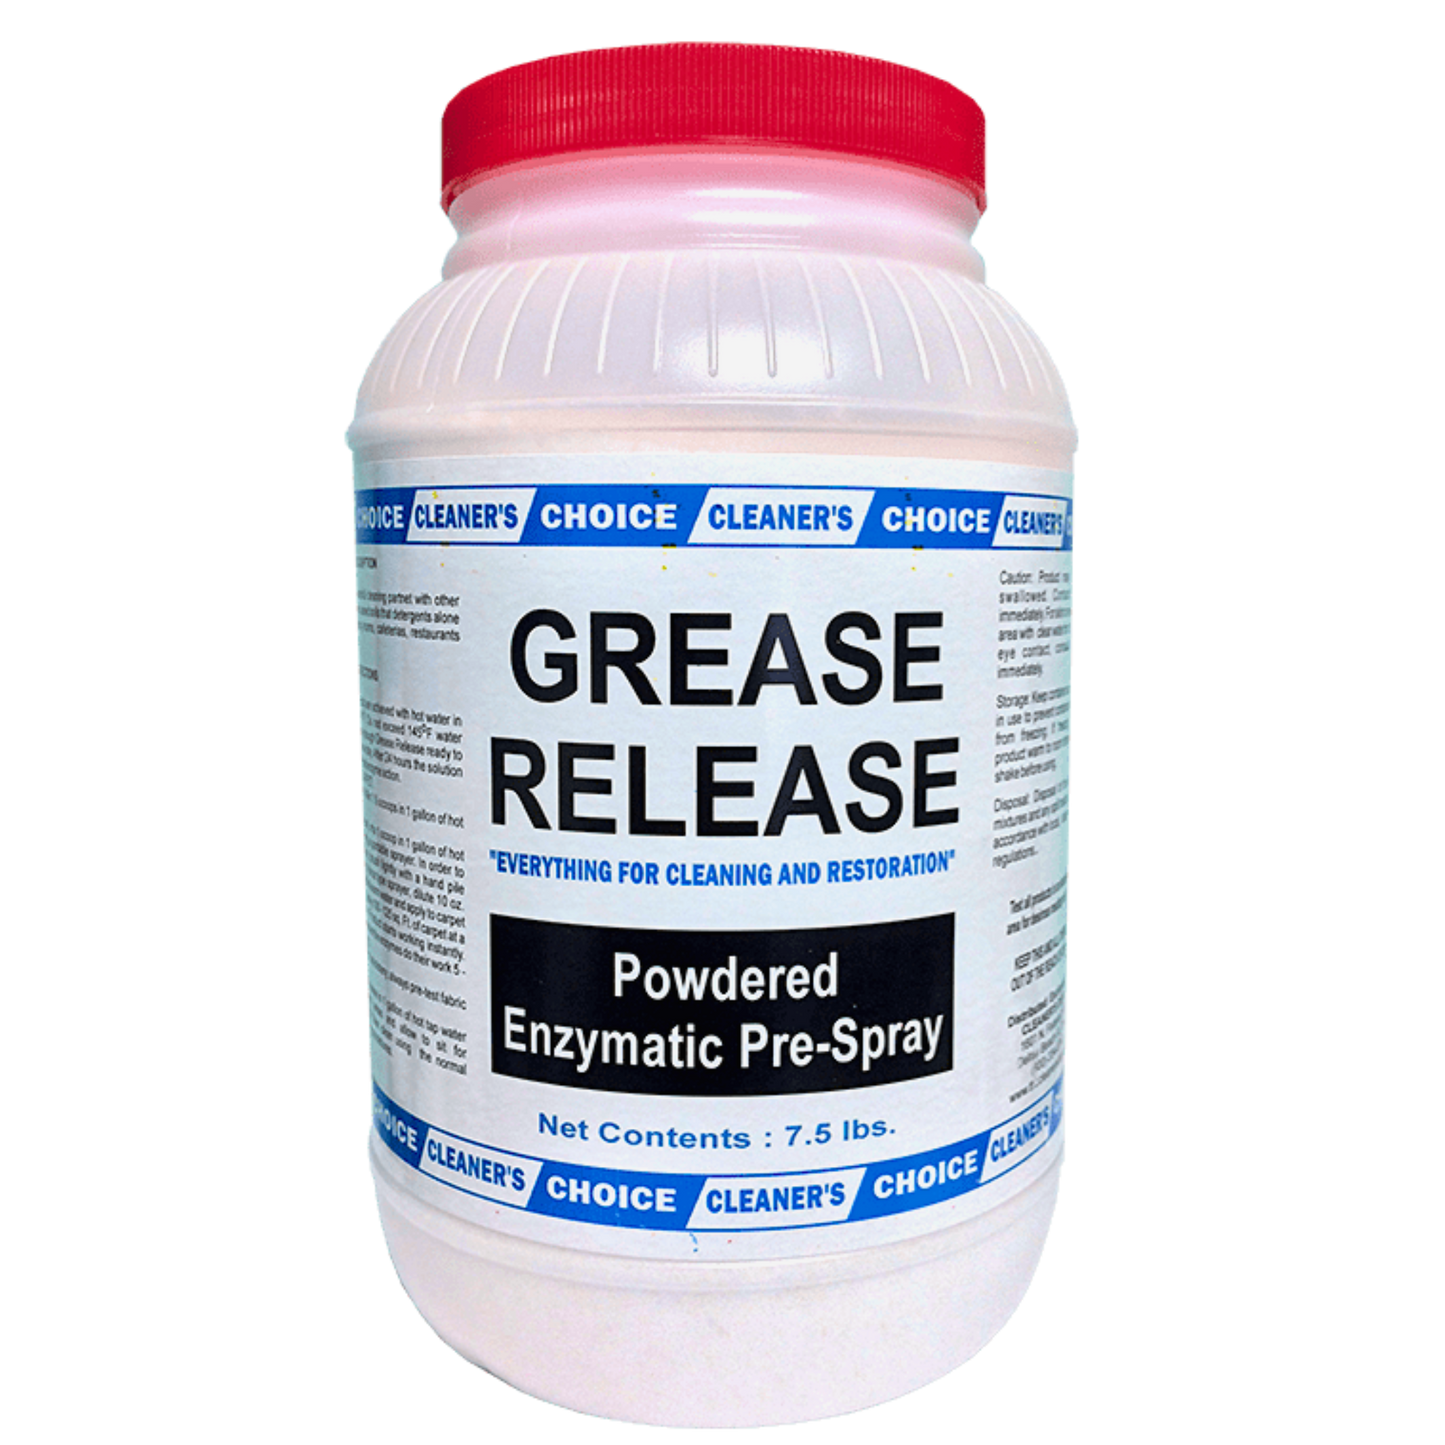 GREASE RELEASE, Concentrated Enzymatic Pre-Spray for Extra Dirty Carpet (Net Content: 7.5 lbs)